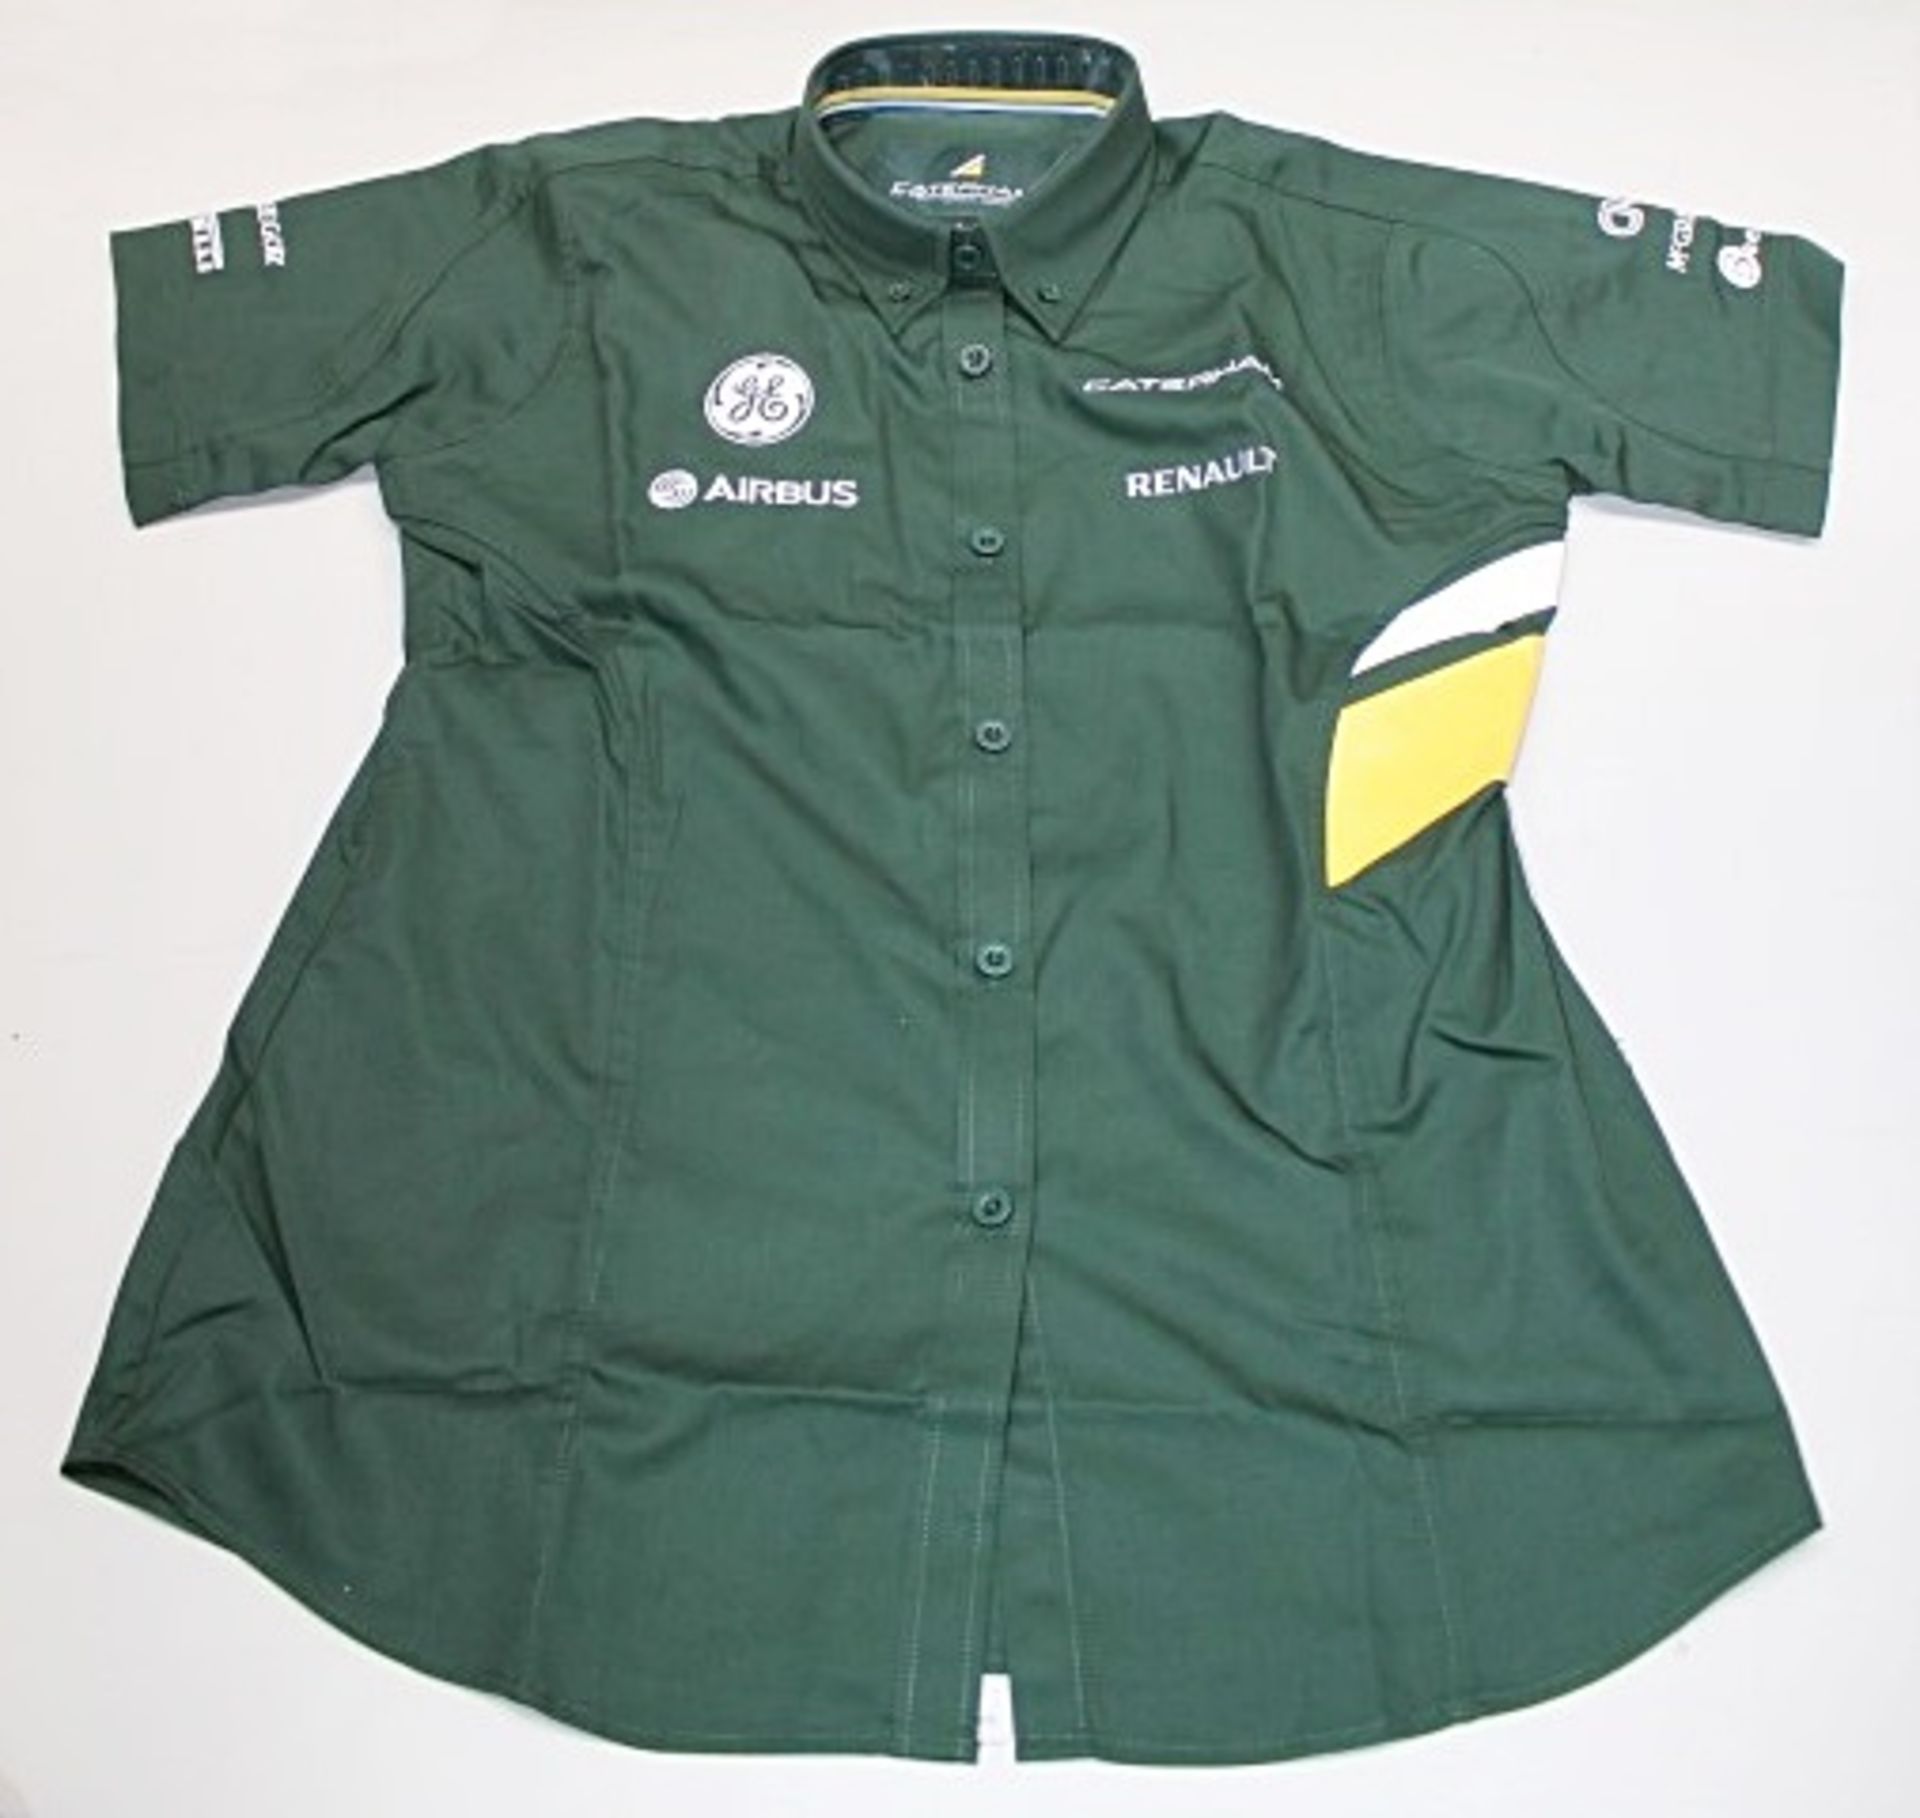 10 x CATERHAM F1 Team Engineer Race Shirts - Short Sleeved - 2 Sizes Supplied: 2 x Small & 8 x